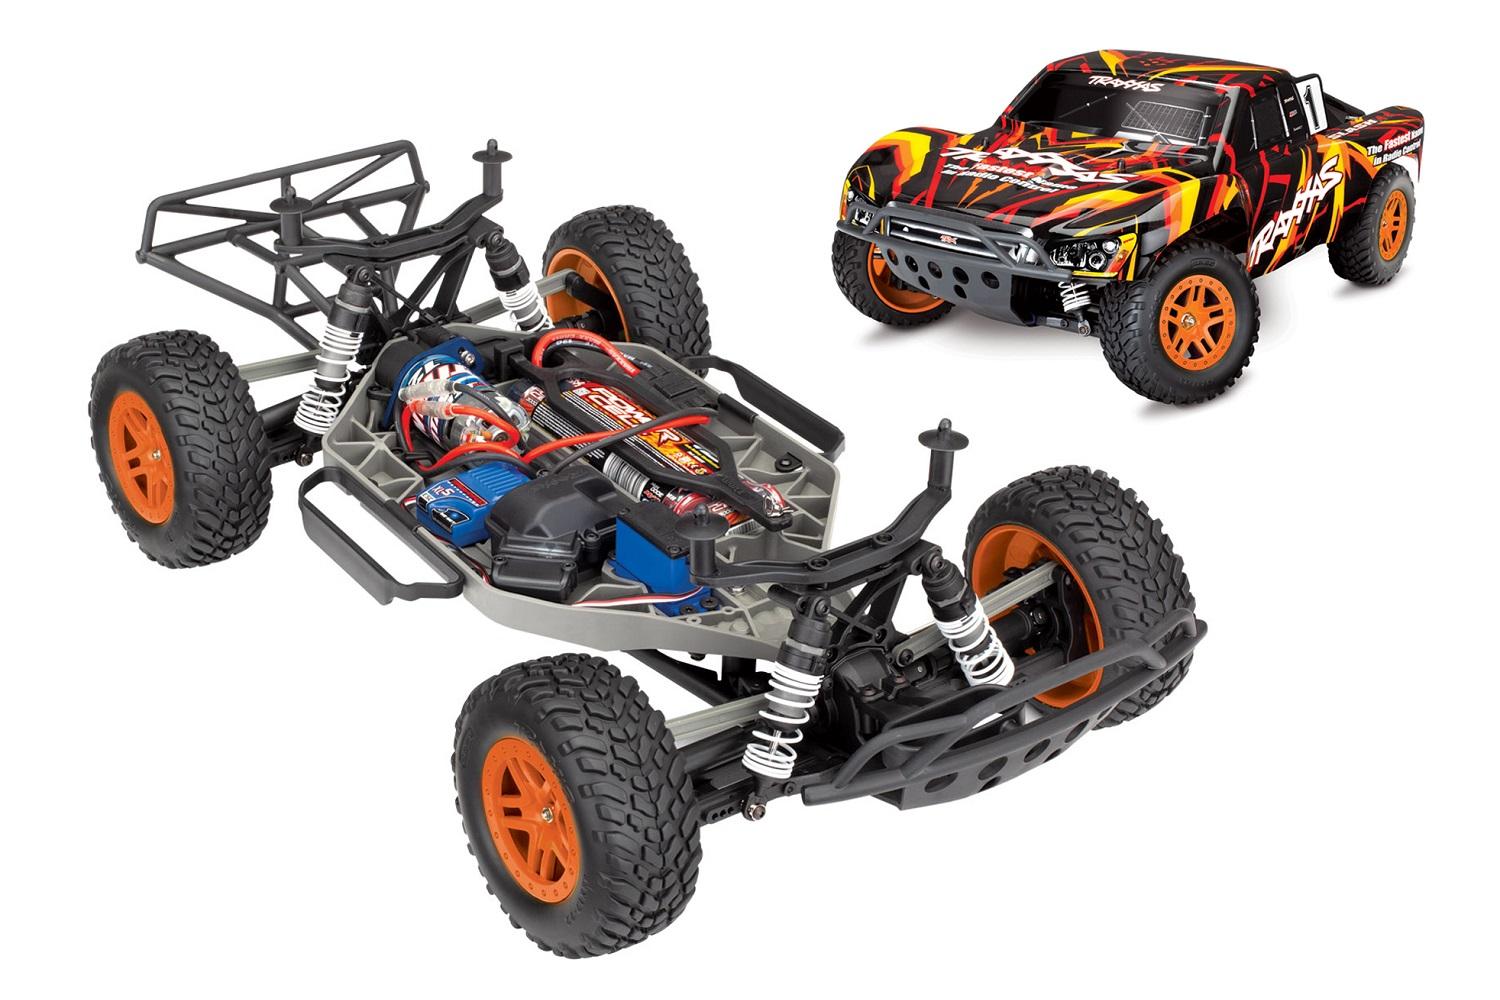 Rc Auto Traxxas: Maximize Your Traxxas' Speed and Performance with These Advanced Features and Upgrade Options